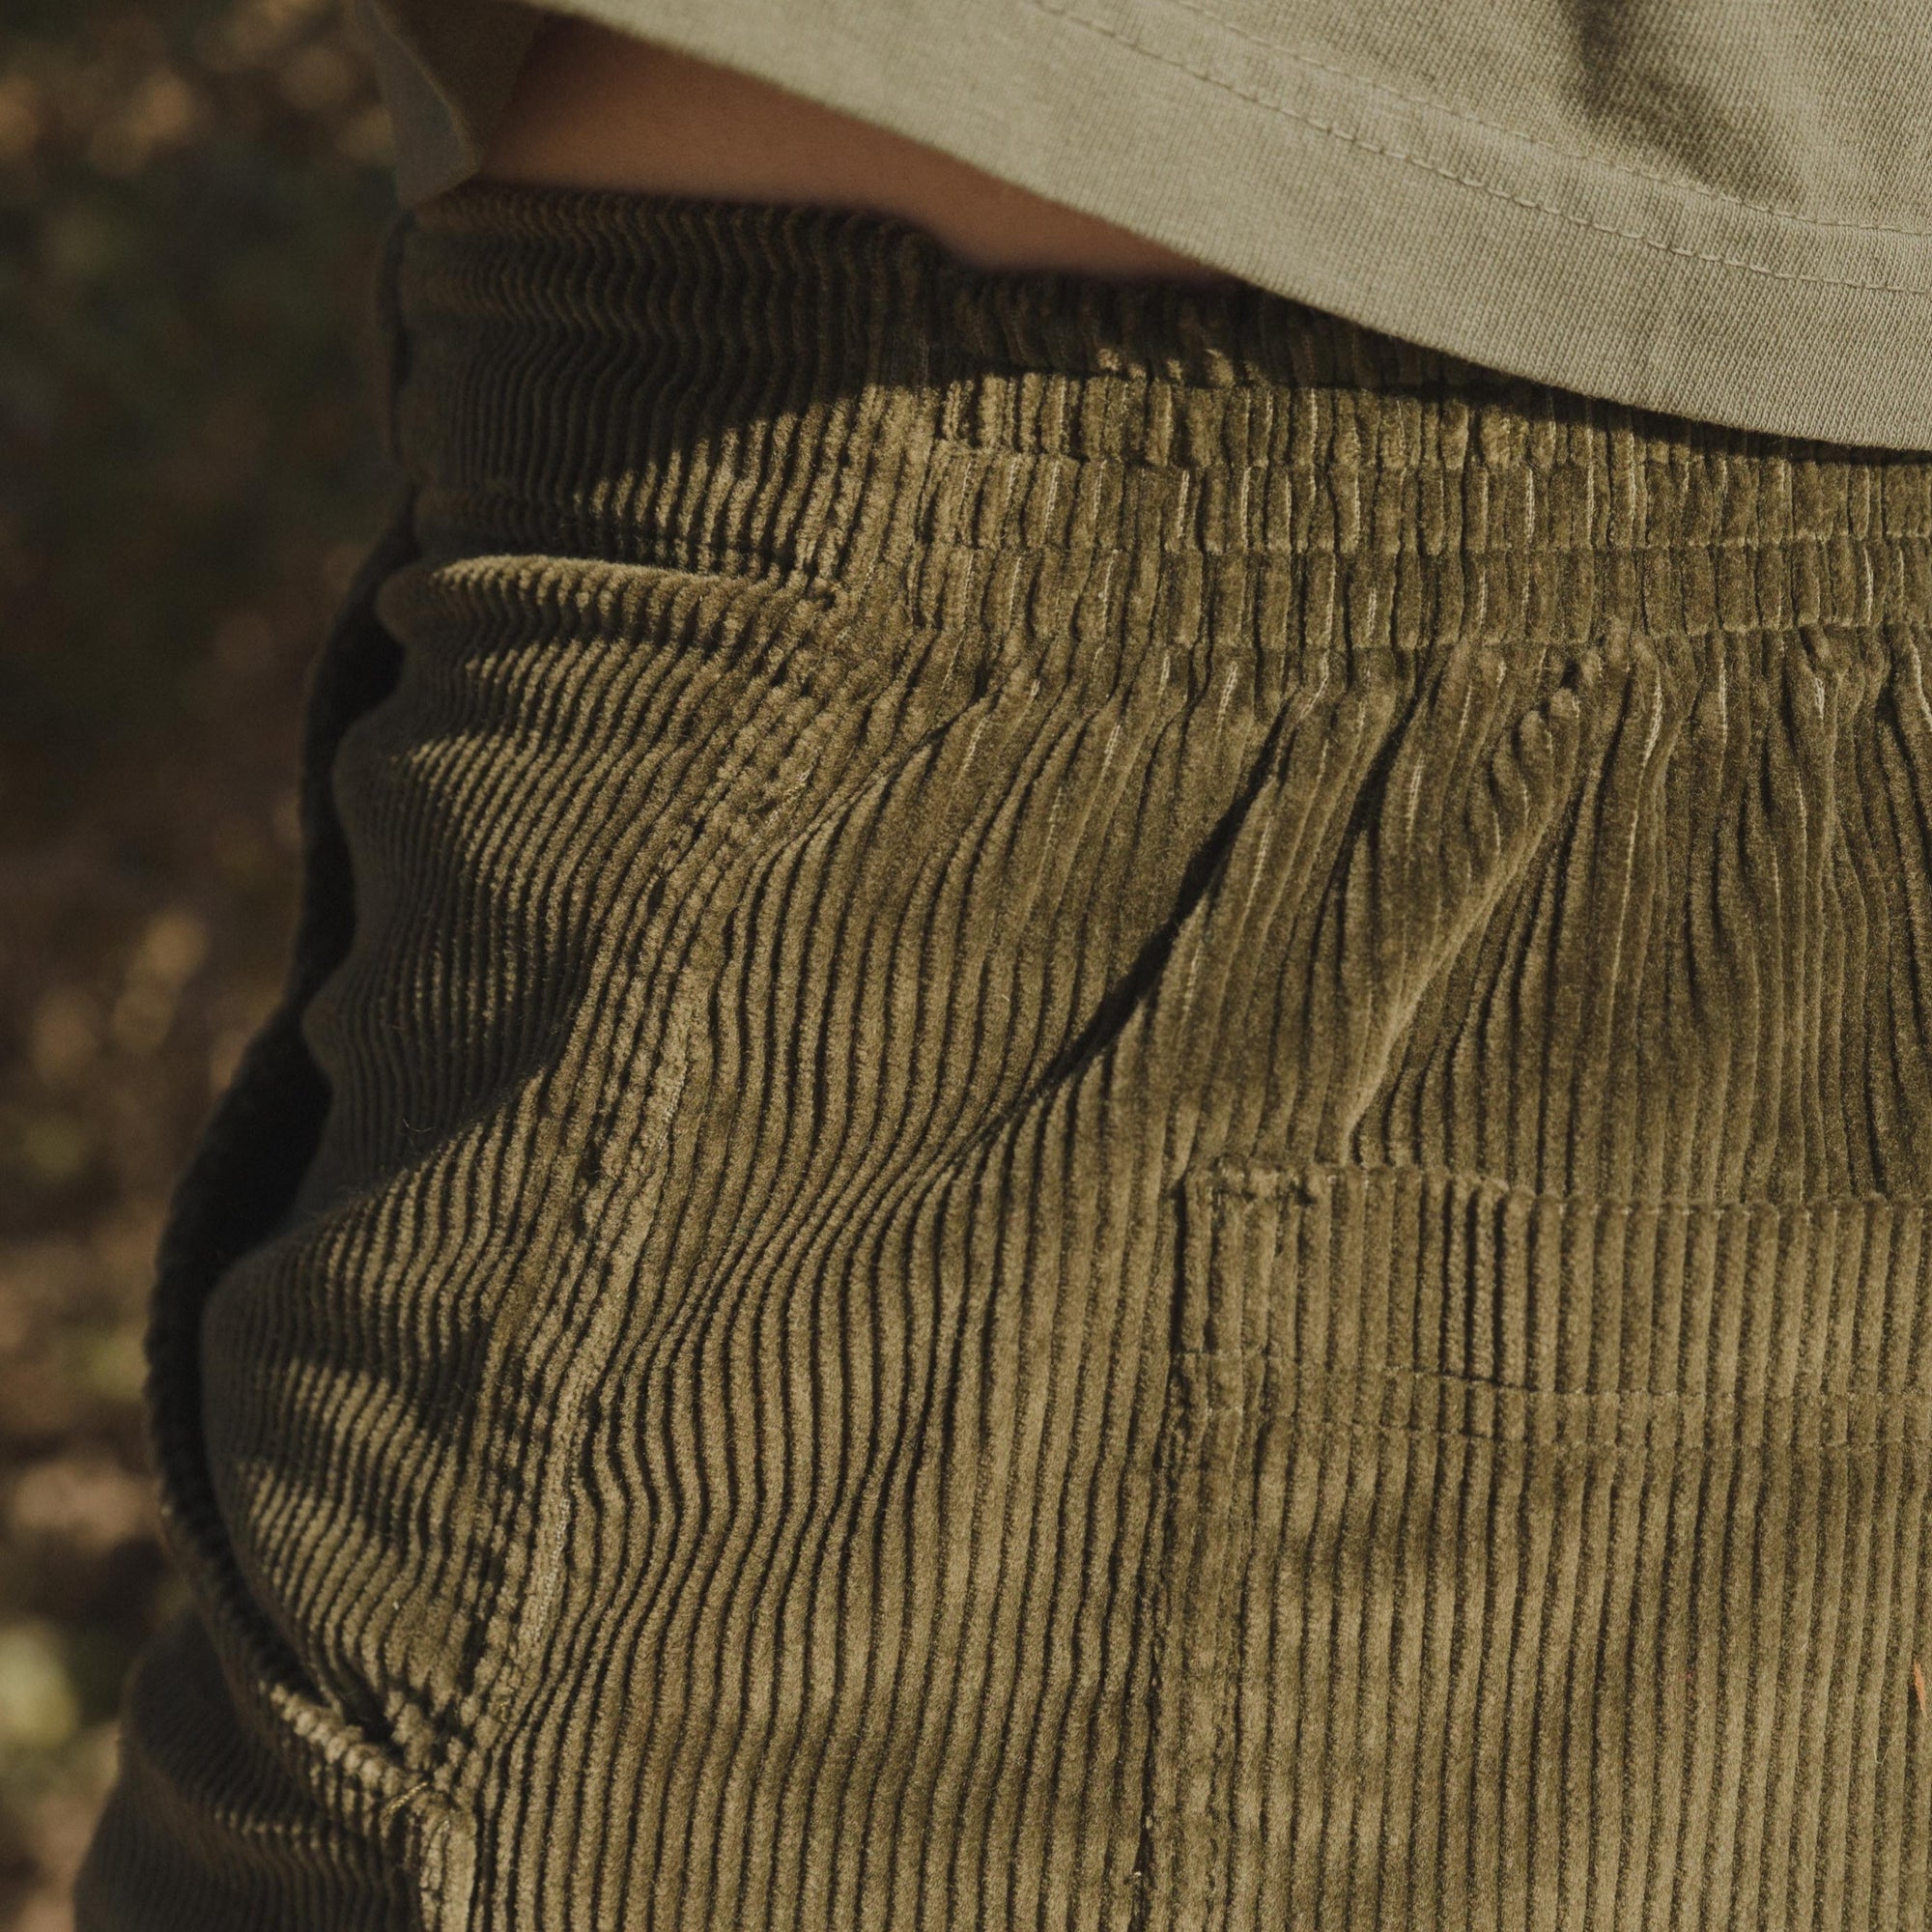 Vintage Inspired Corduroy Shorts with Elastic Waist in Green